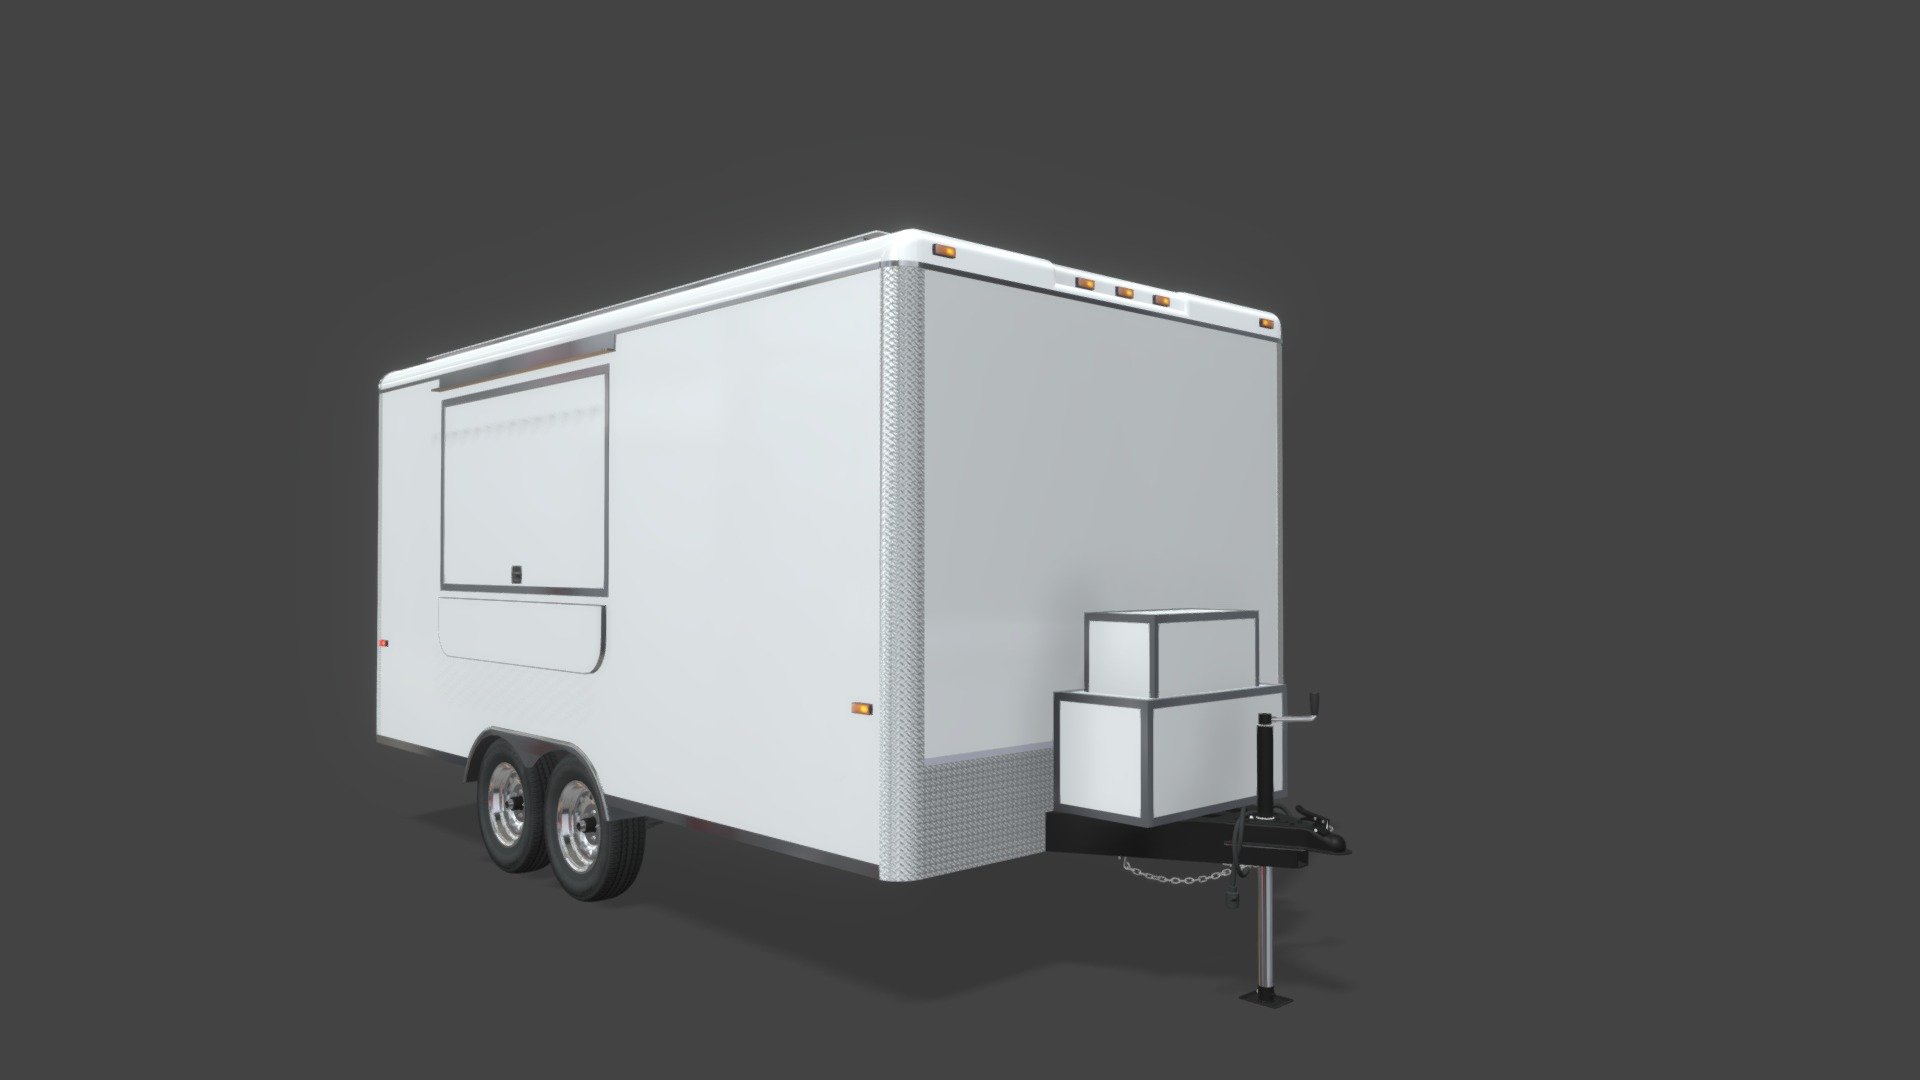 The 16ft Sampling trailer is modeled after an asset at Lime Media. This asset is great for a small activation.
The 3D artist is Scott Neece 3d model